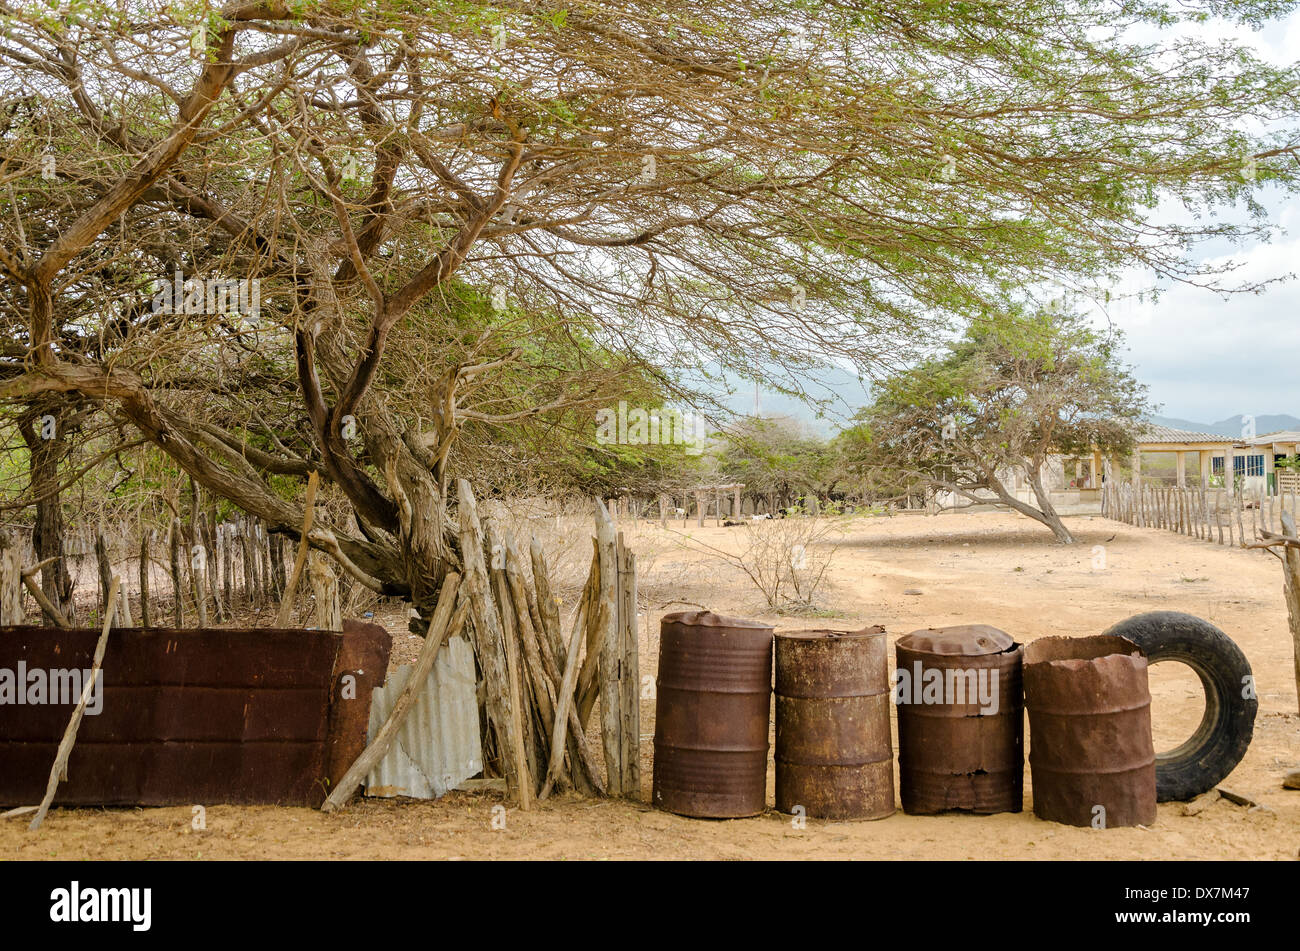 Rusted barrels making a fence in a rural village in La Guajira, Colombia Stock Photo